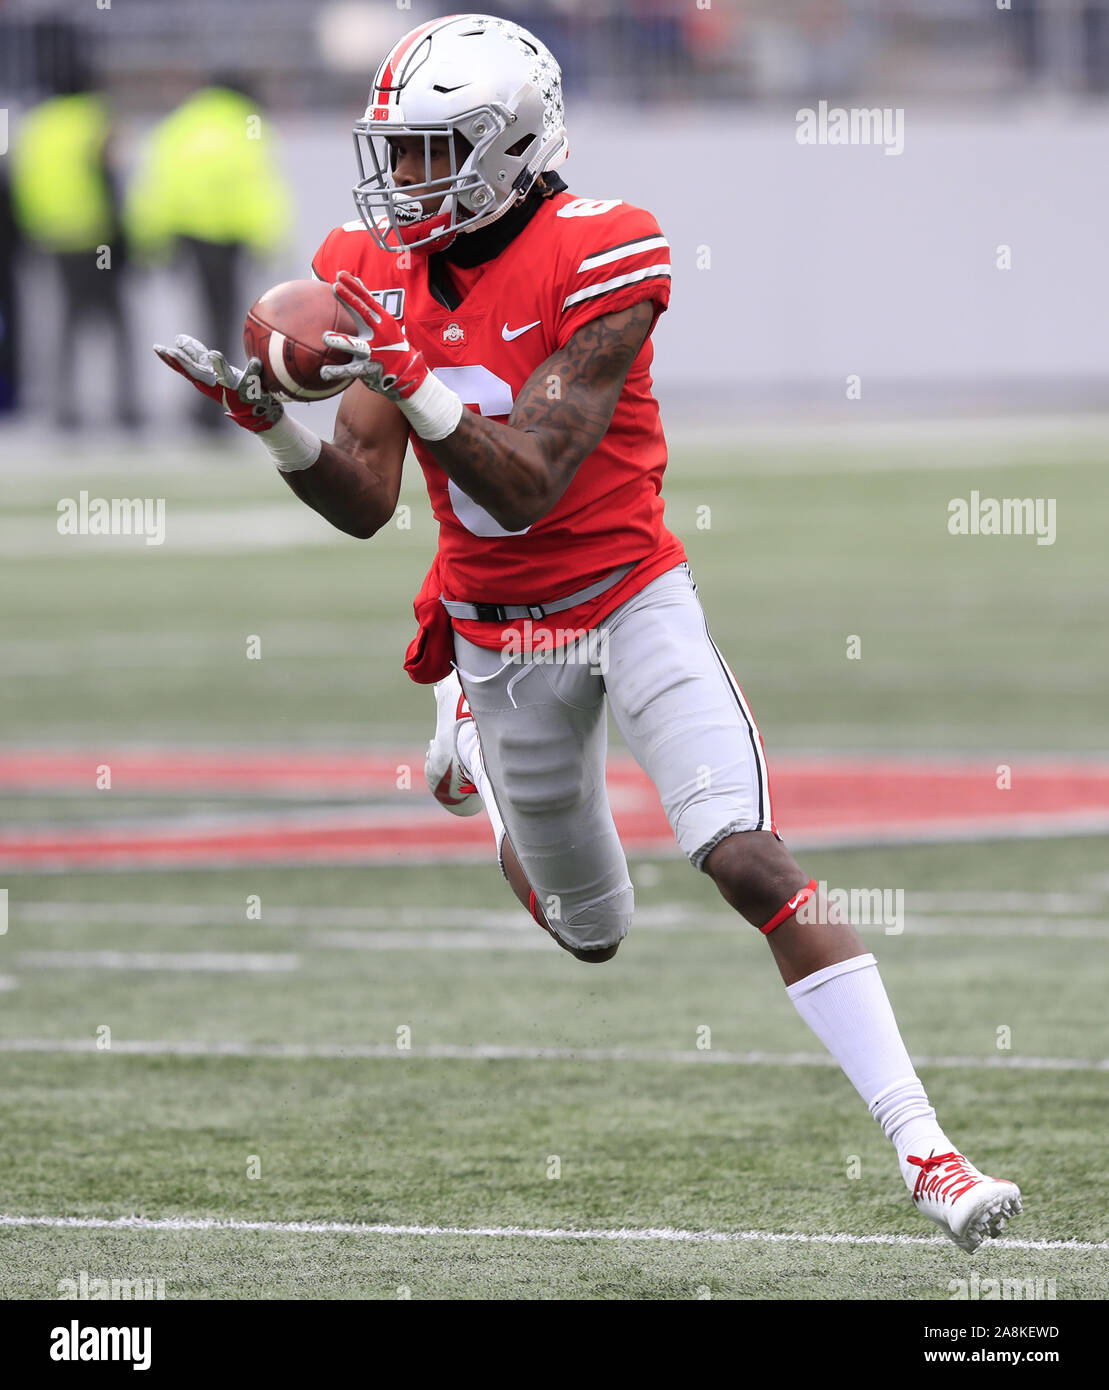 Columbus, United States. 09th Nov, 2019. Ohio State Buckeye's Jameson WIlliams (6) makes a catch against the Maryland Terrapins Saturday, November 9, 2019 in Columbus, Ohio. Photo by Aaron Josefczyk/UPI Credit: UPI/Alamy Live News Stock Photo